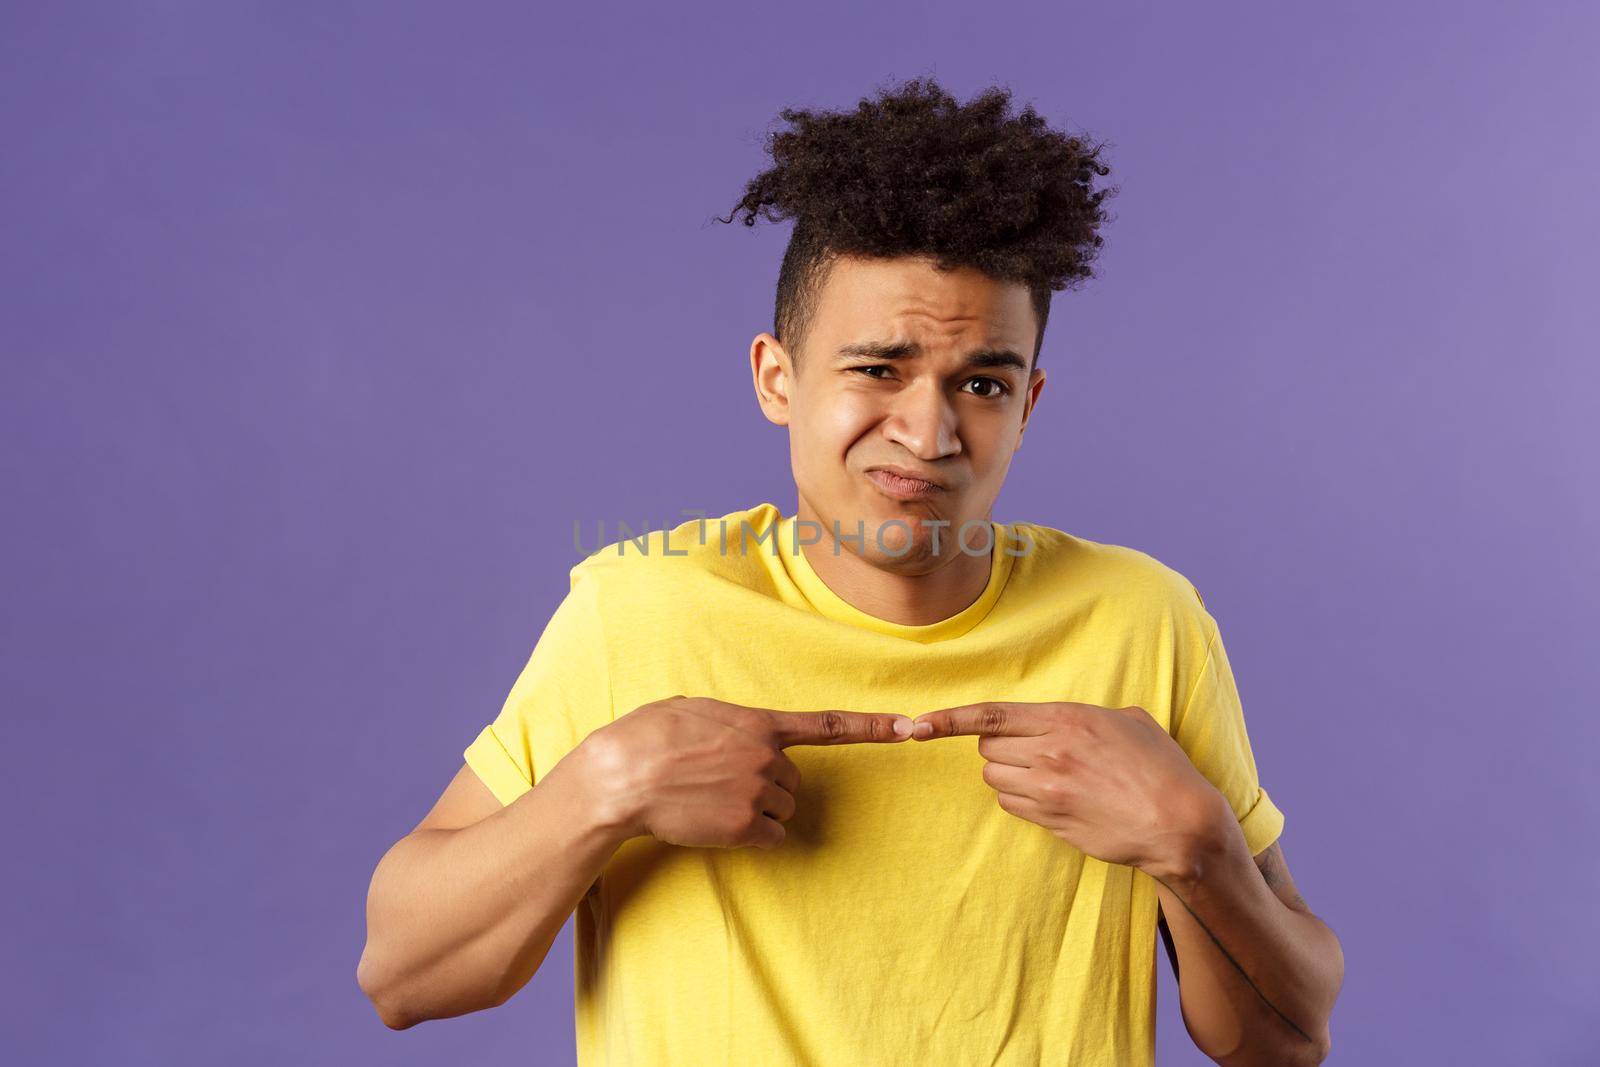 Close-up portrait of shy and modest young silly hispanic man trying say something but being too insecure, grimacing and frowning, look timid, two fingers touching pose, purple background.